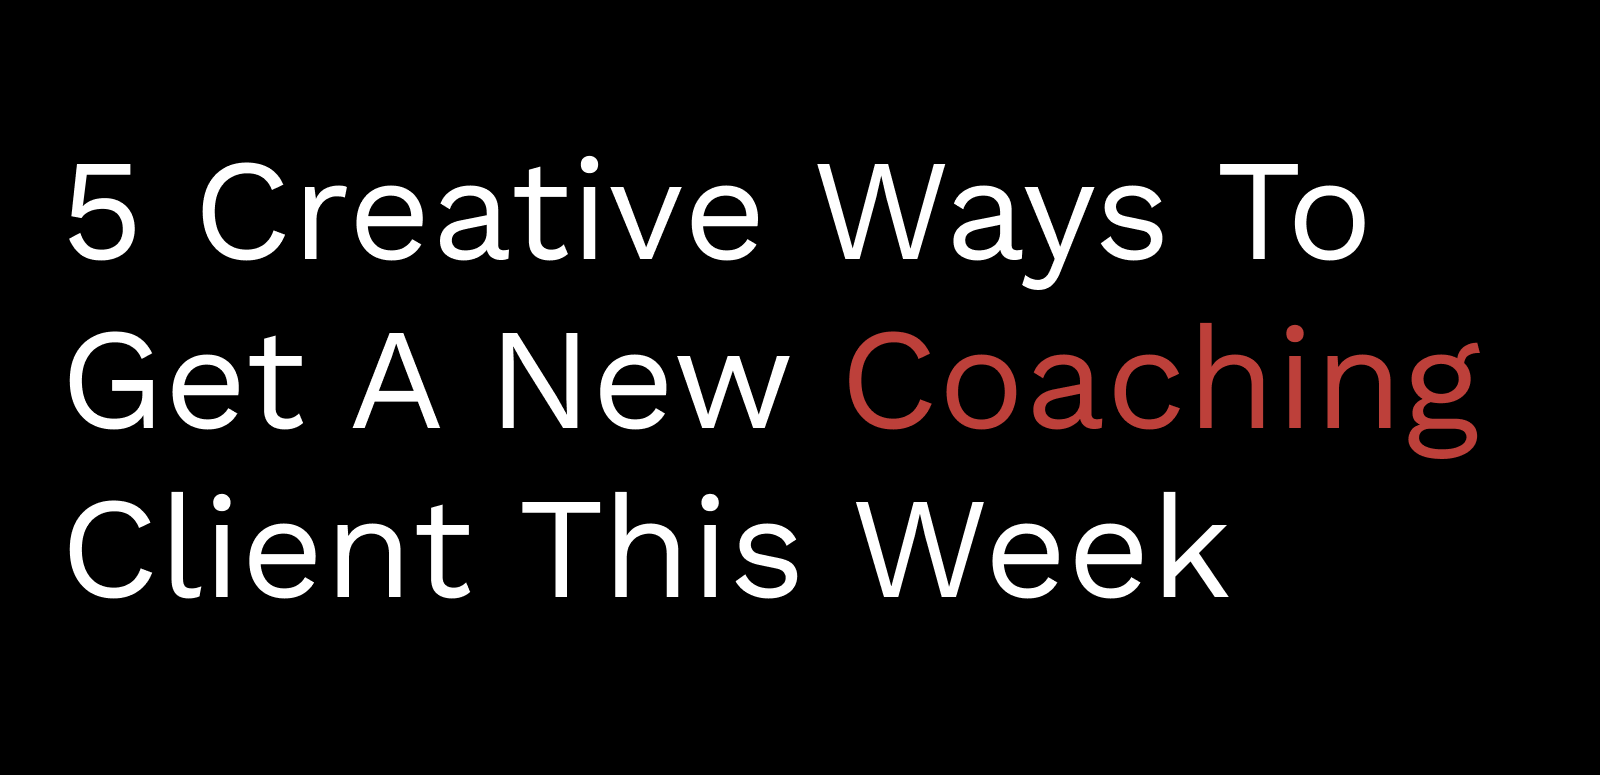 5 Creative Ways To Get A New Coaching Client This Week